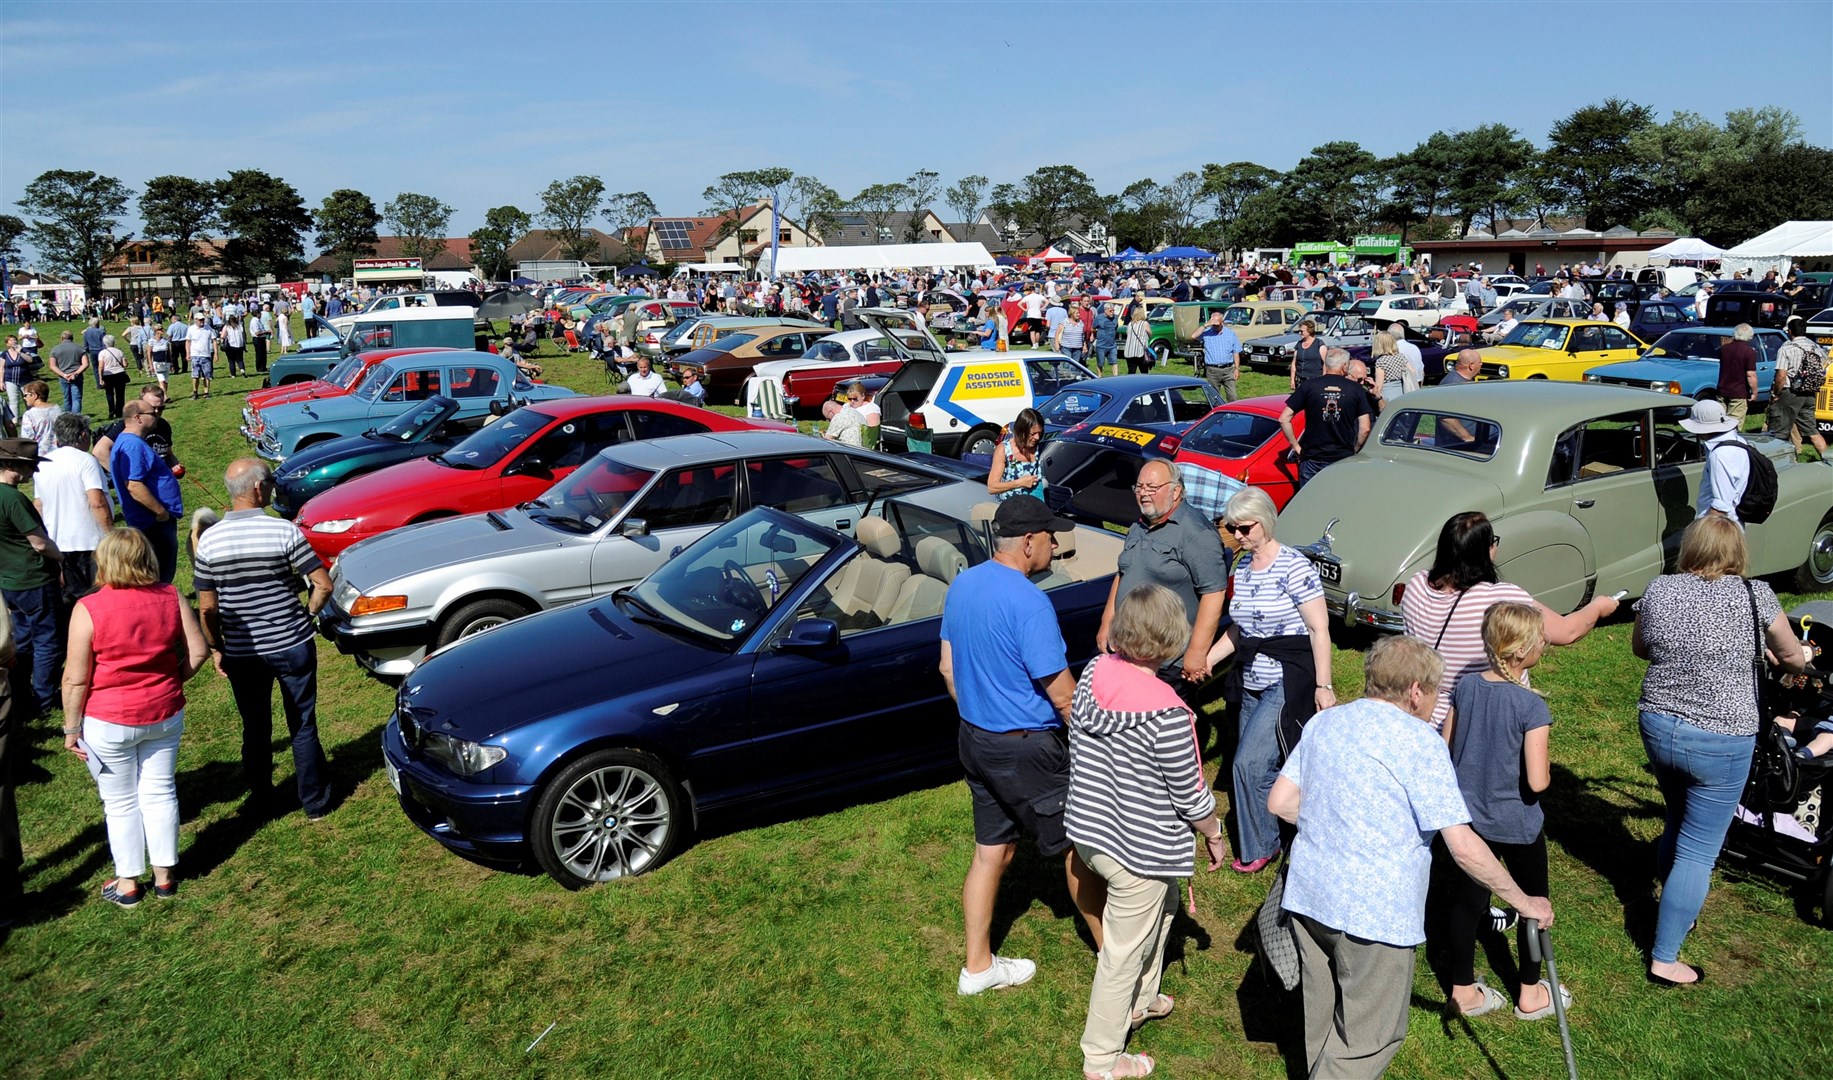 A good crowd is expected at this year’s Buckie Classic Car Show.